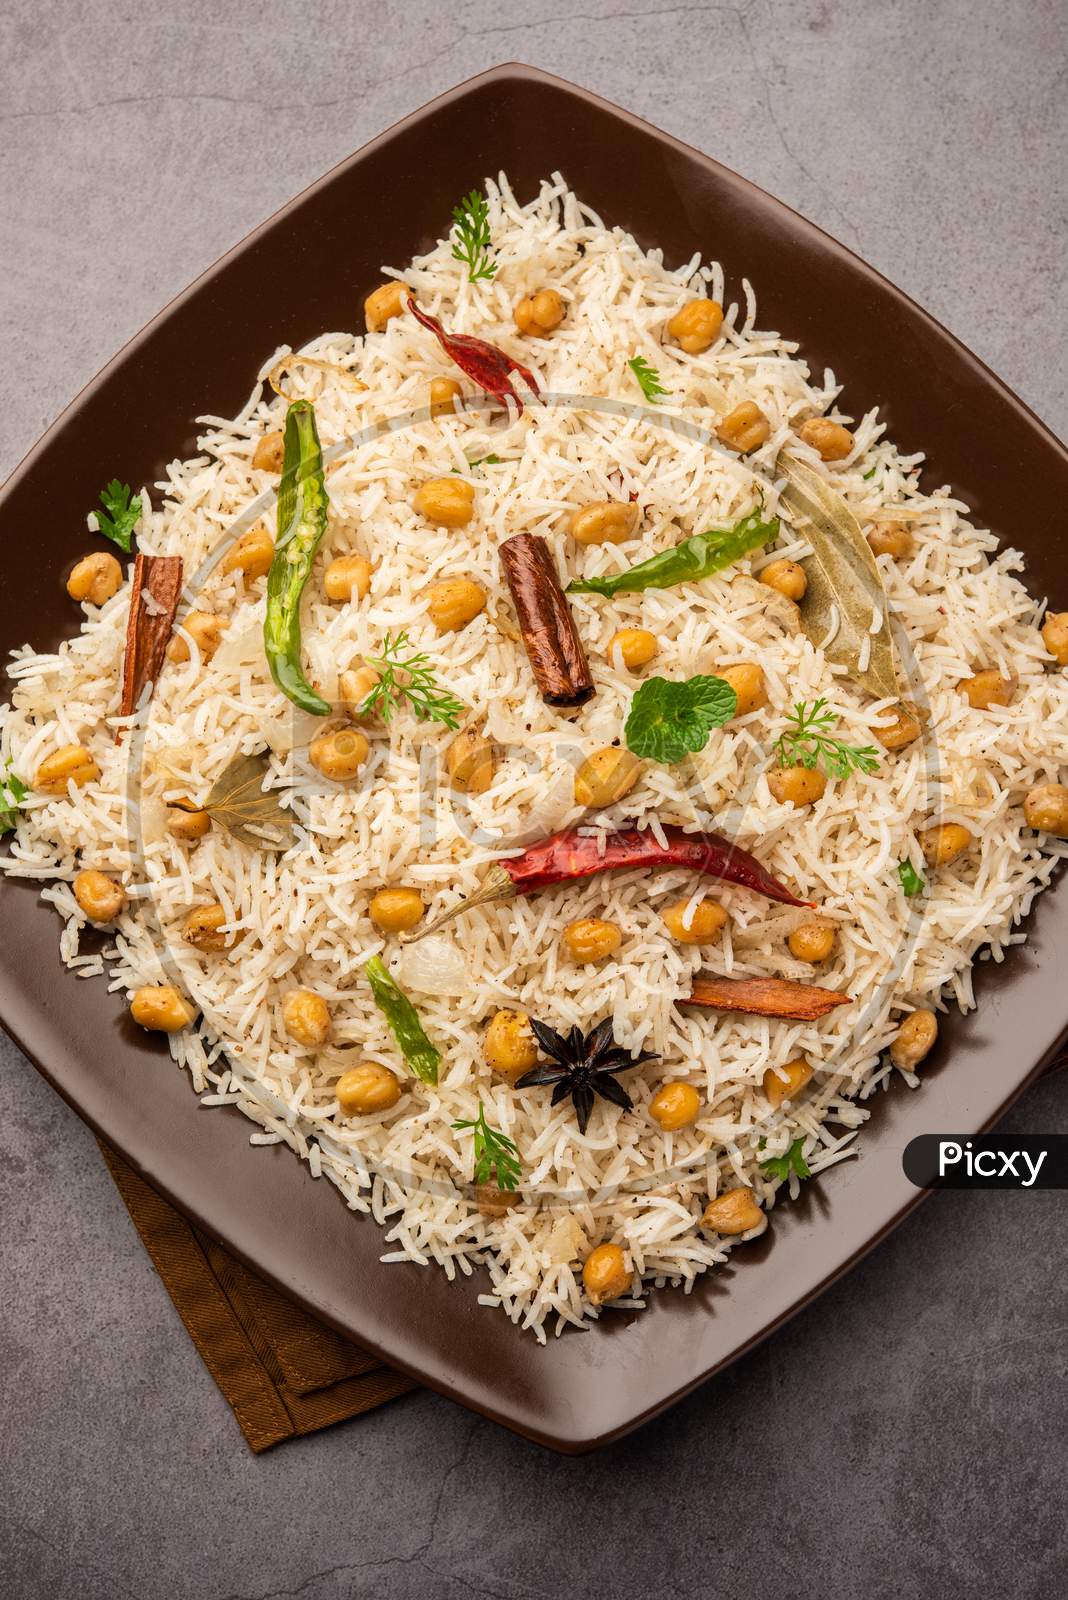 Indian Veg Chana Pulav Also Known As Chickpea Biryani, Pulav Or Pilaf